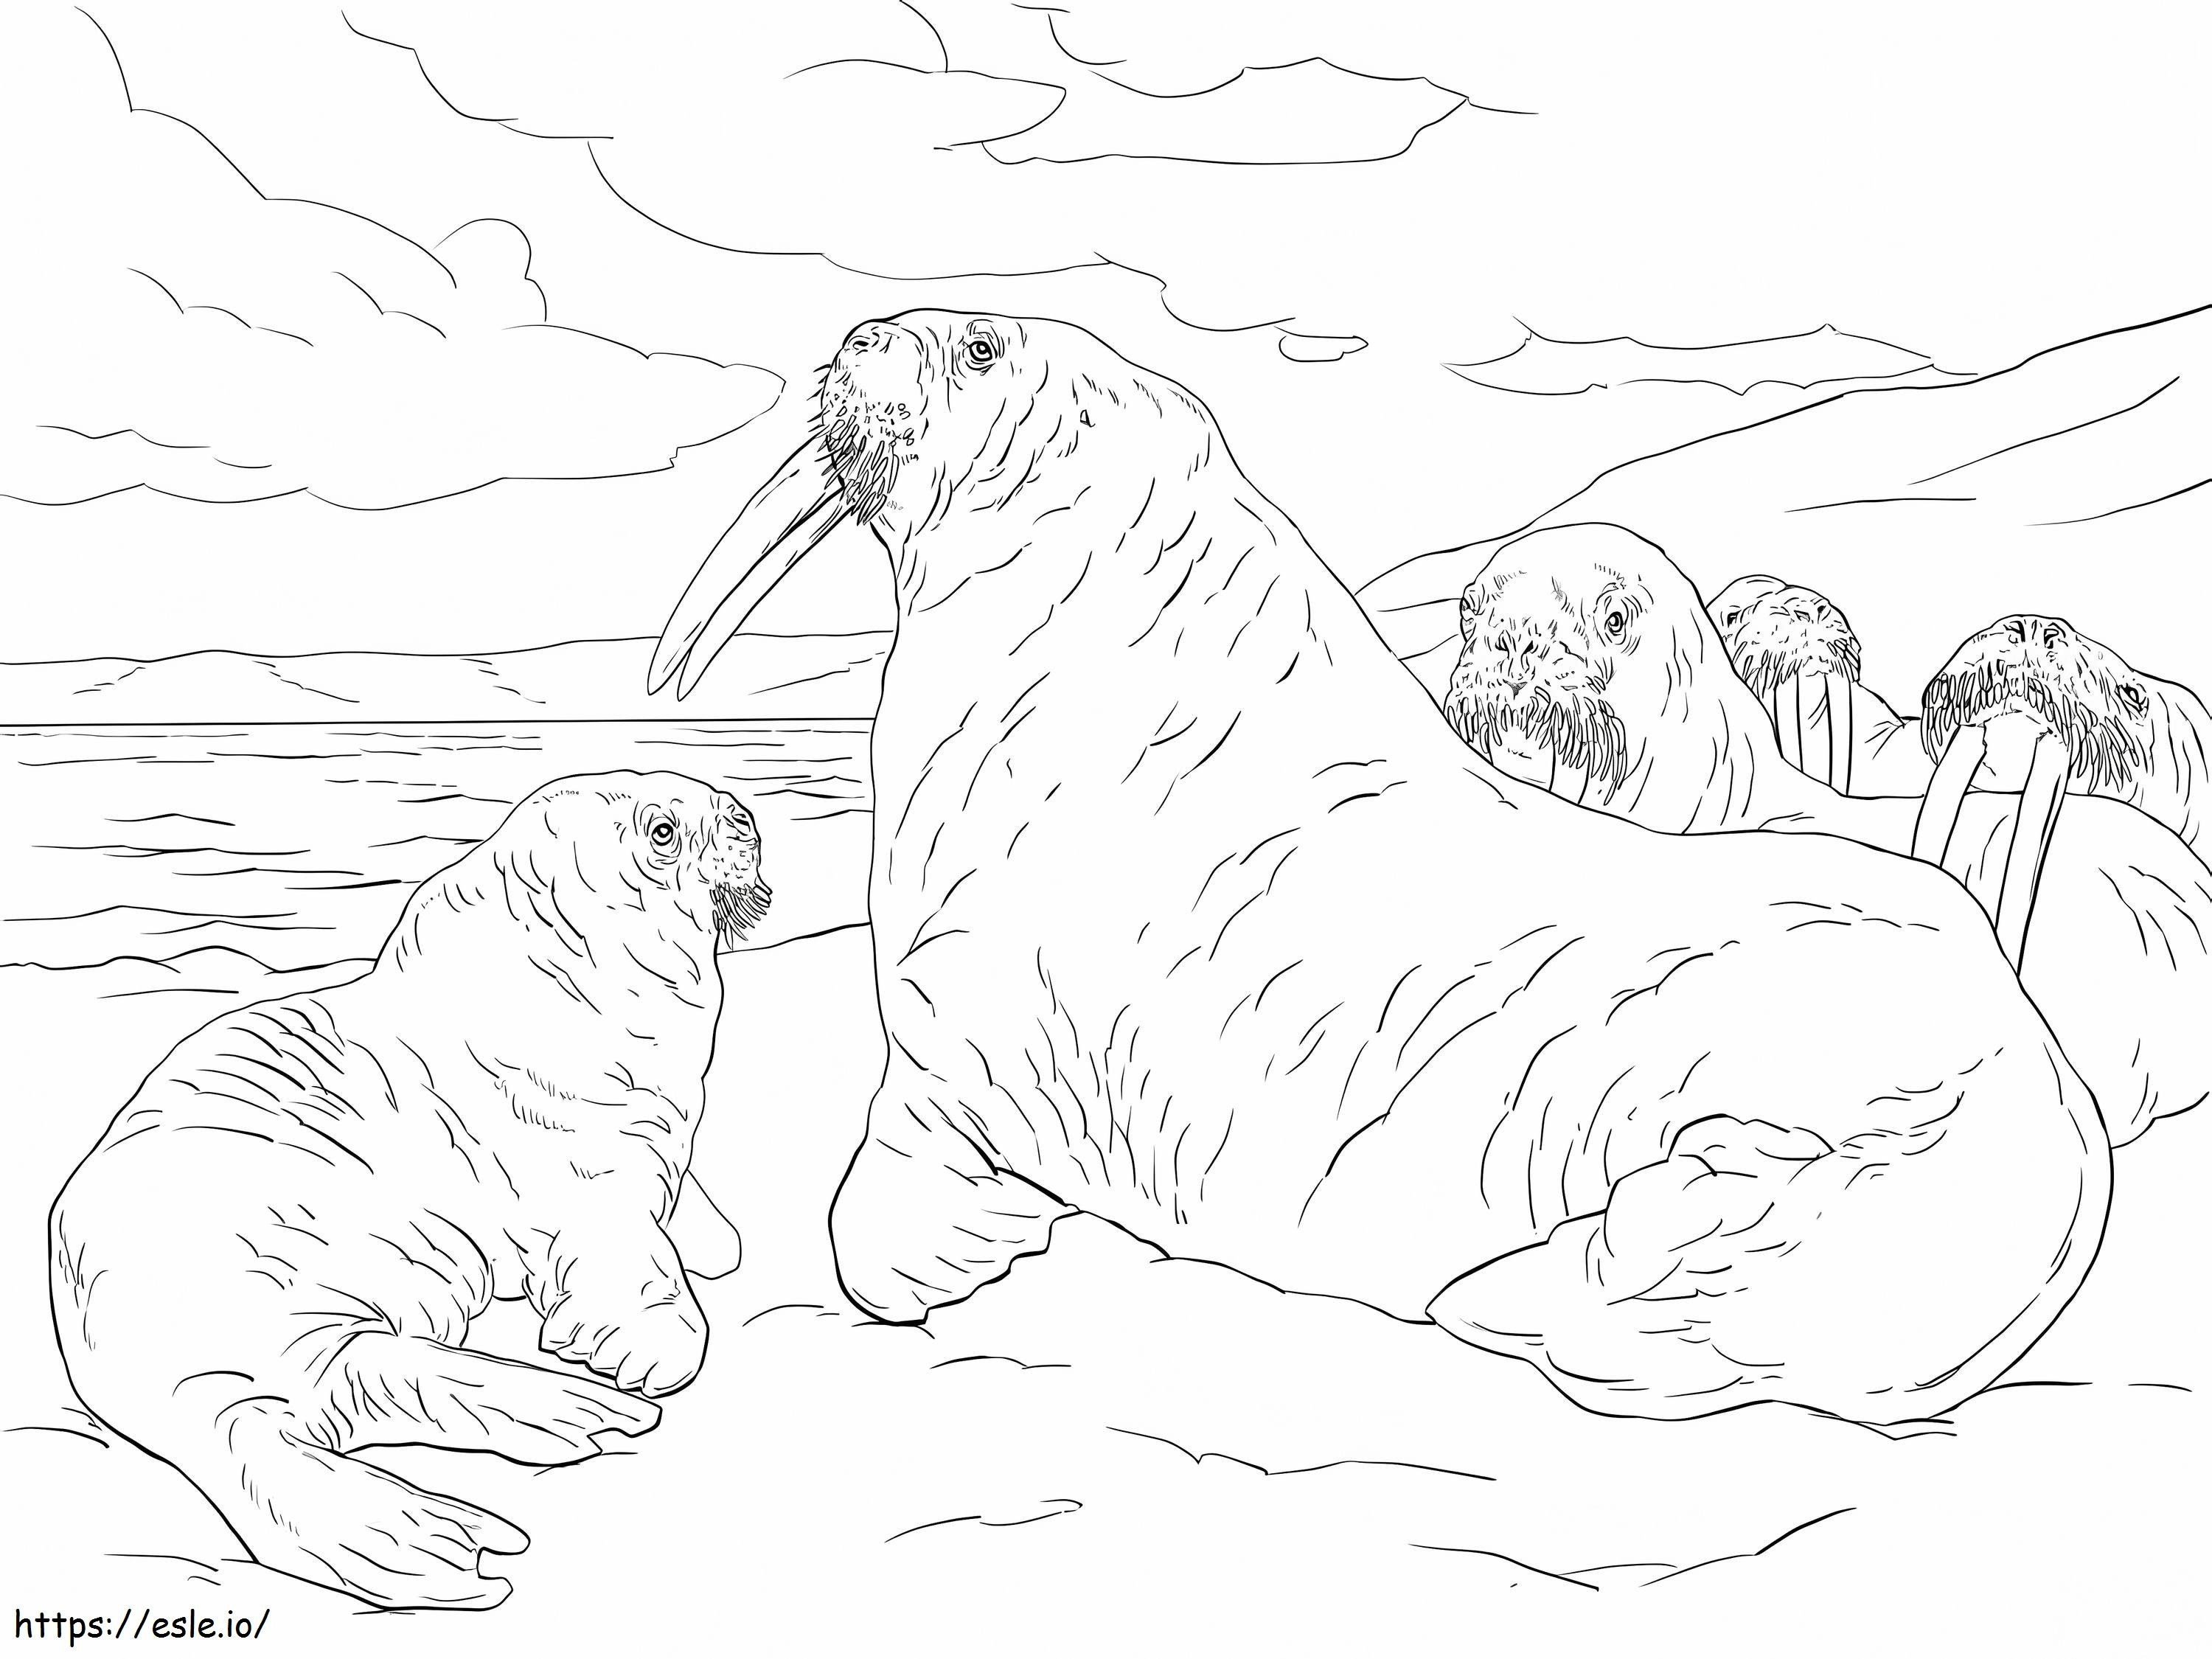 1562657972 Family Of Walrus A4 E1600823538450 coloring page